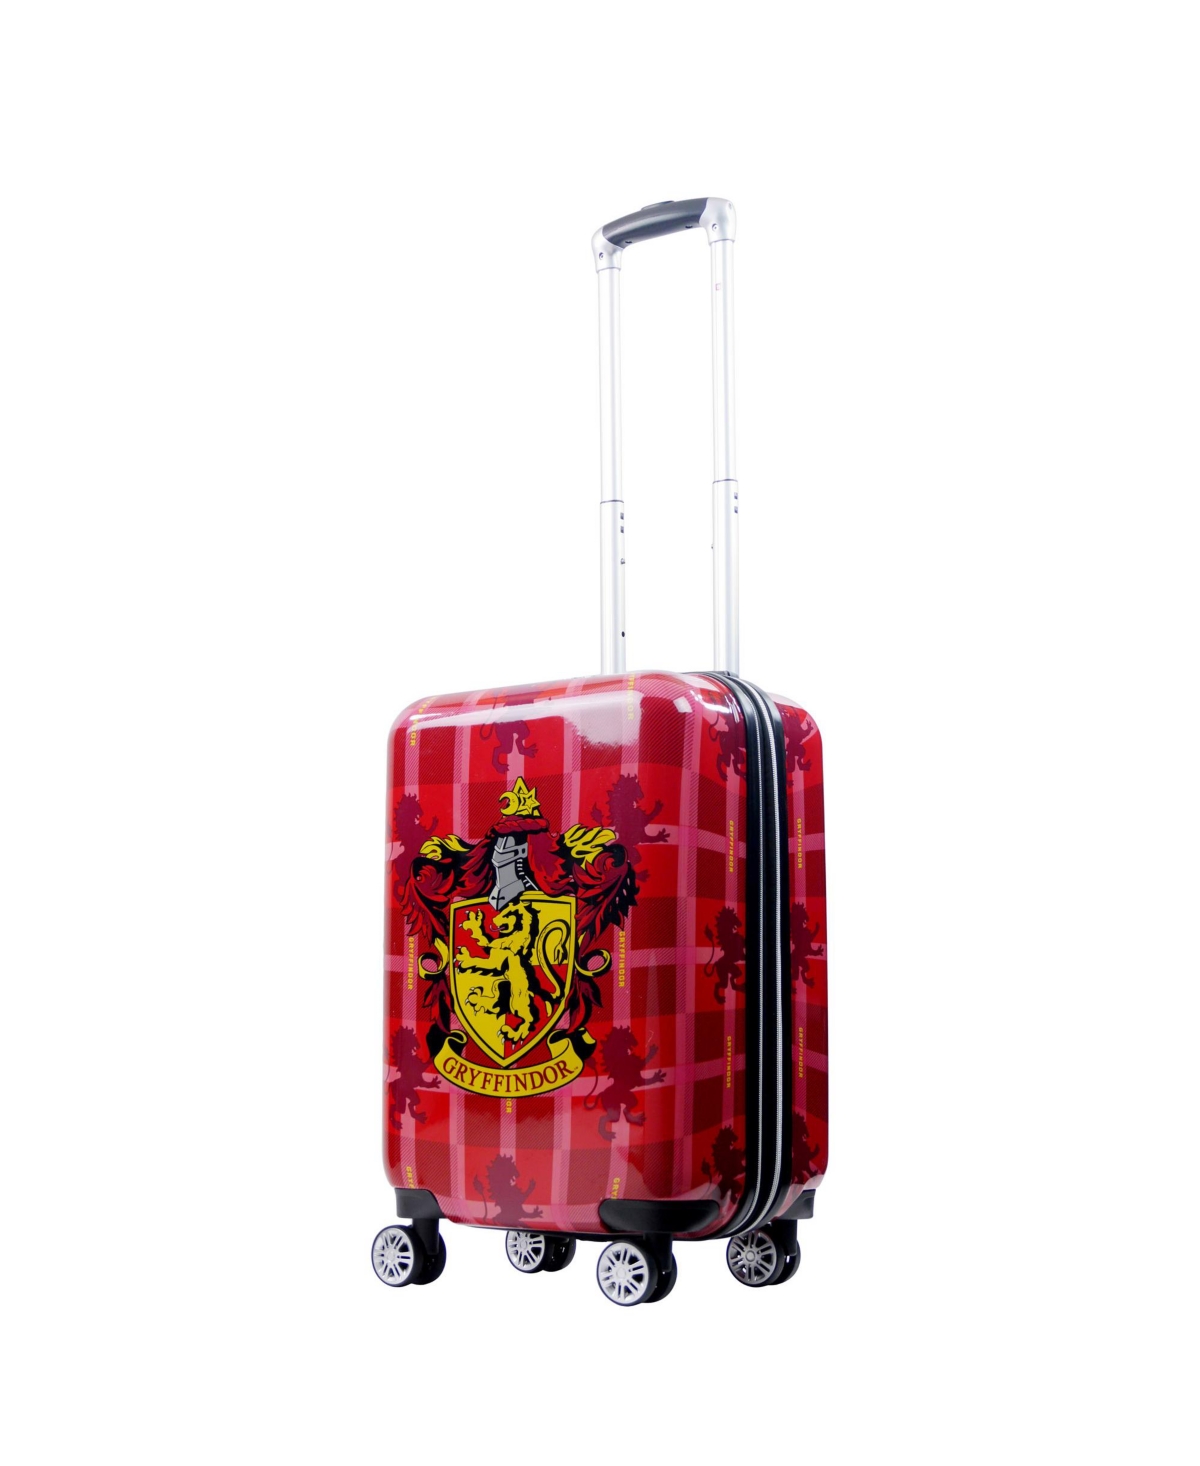 Harry Potter Ful Gryffindor 22" Printed Carry-on Luggage - Multi-